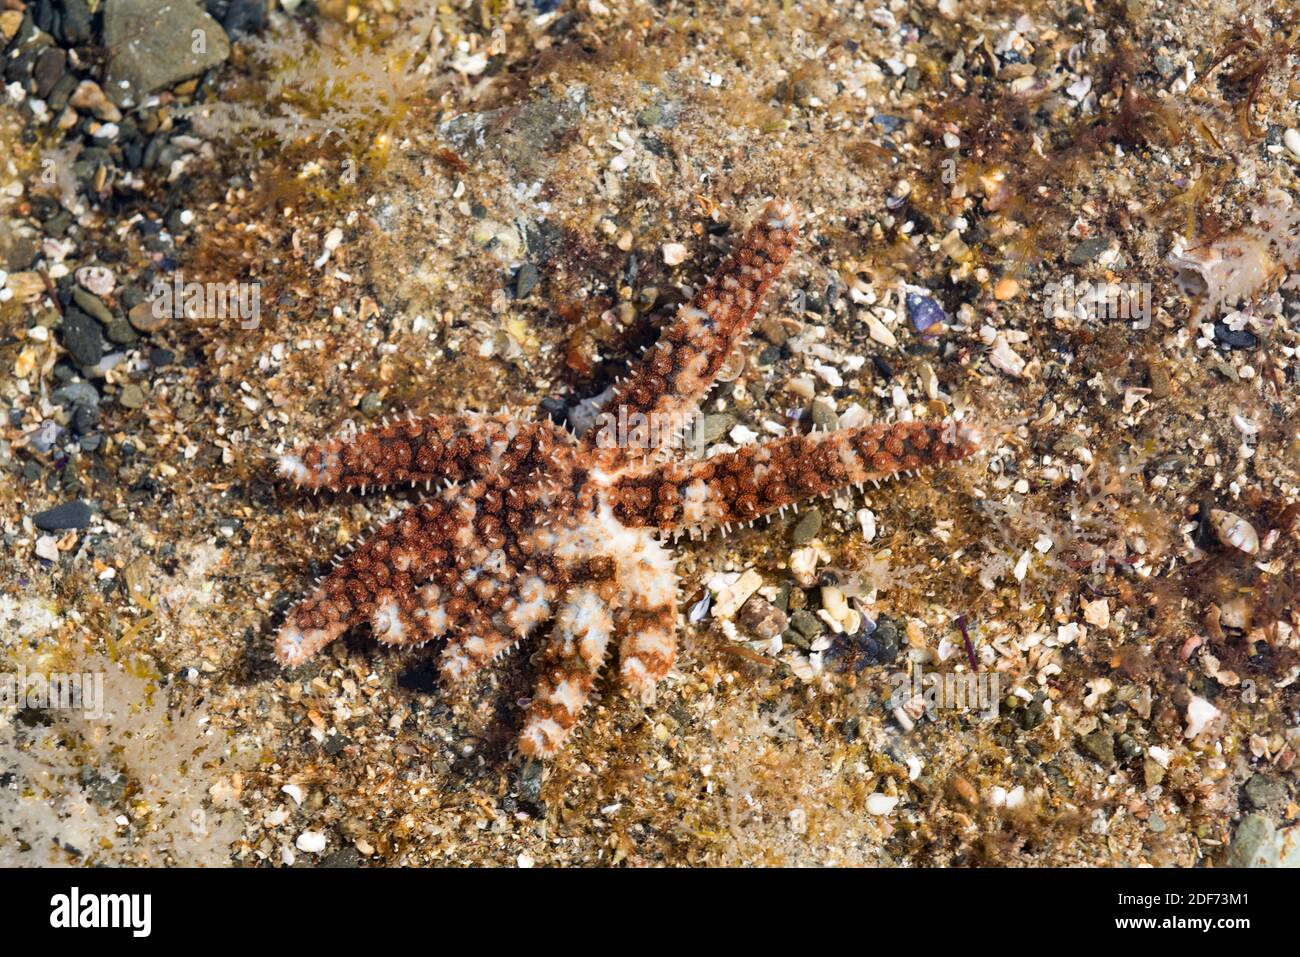 Blue spiny starfish (Coscinasterias tenuispina) is a sea star omnivore. Specimen with an anormal number of arms. This photo was taken in Cap Ras, Stock Photo